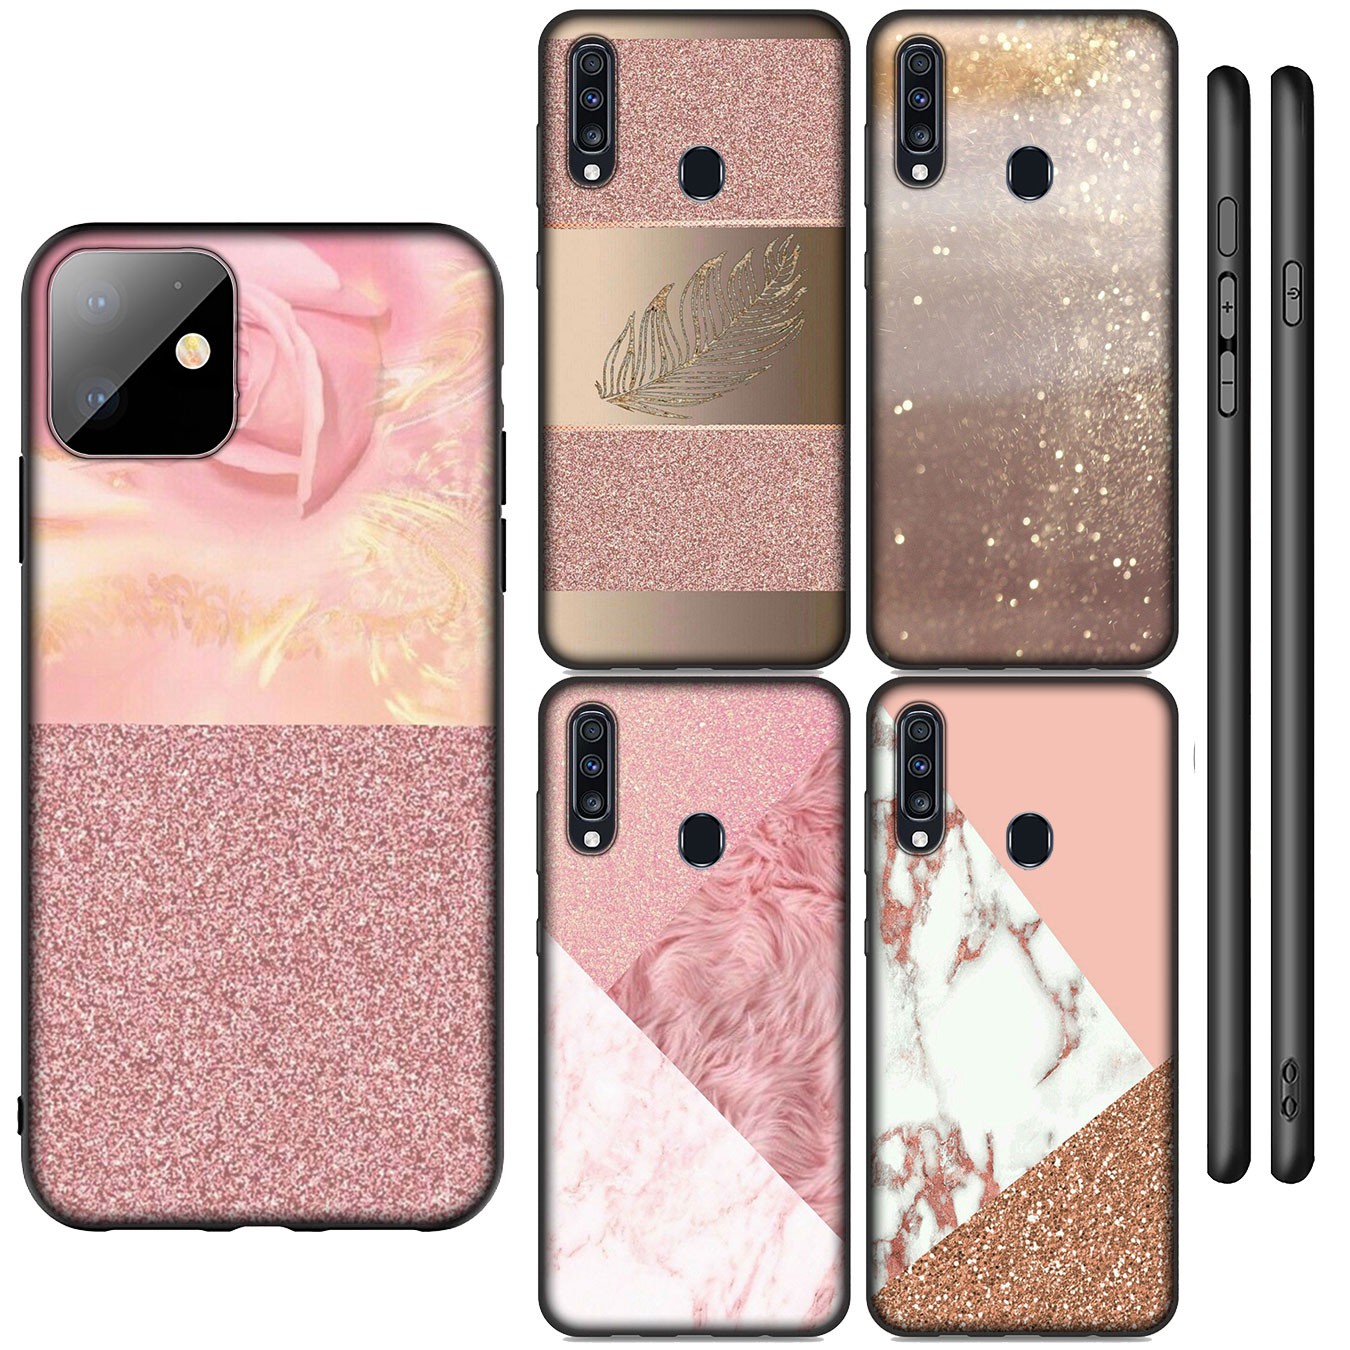 iPhone 12 Mini 11 Max Pro SE 2020 XR Casing Soft Silicone Marble Gold Pink rose Glitter Dust Phone Case